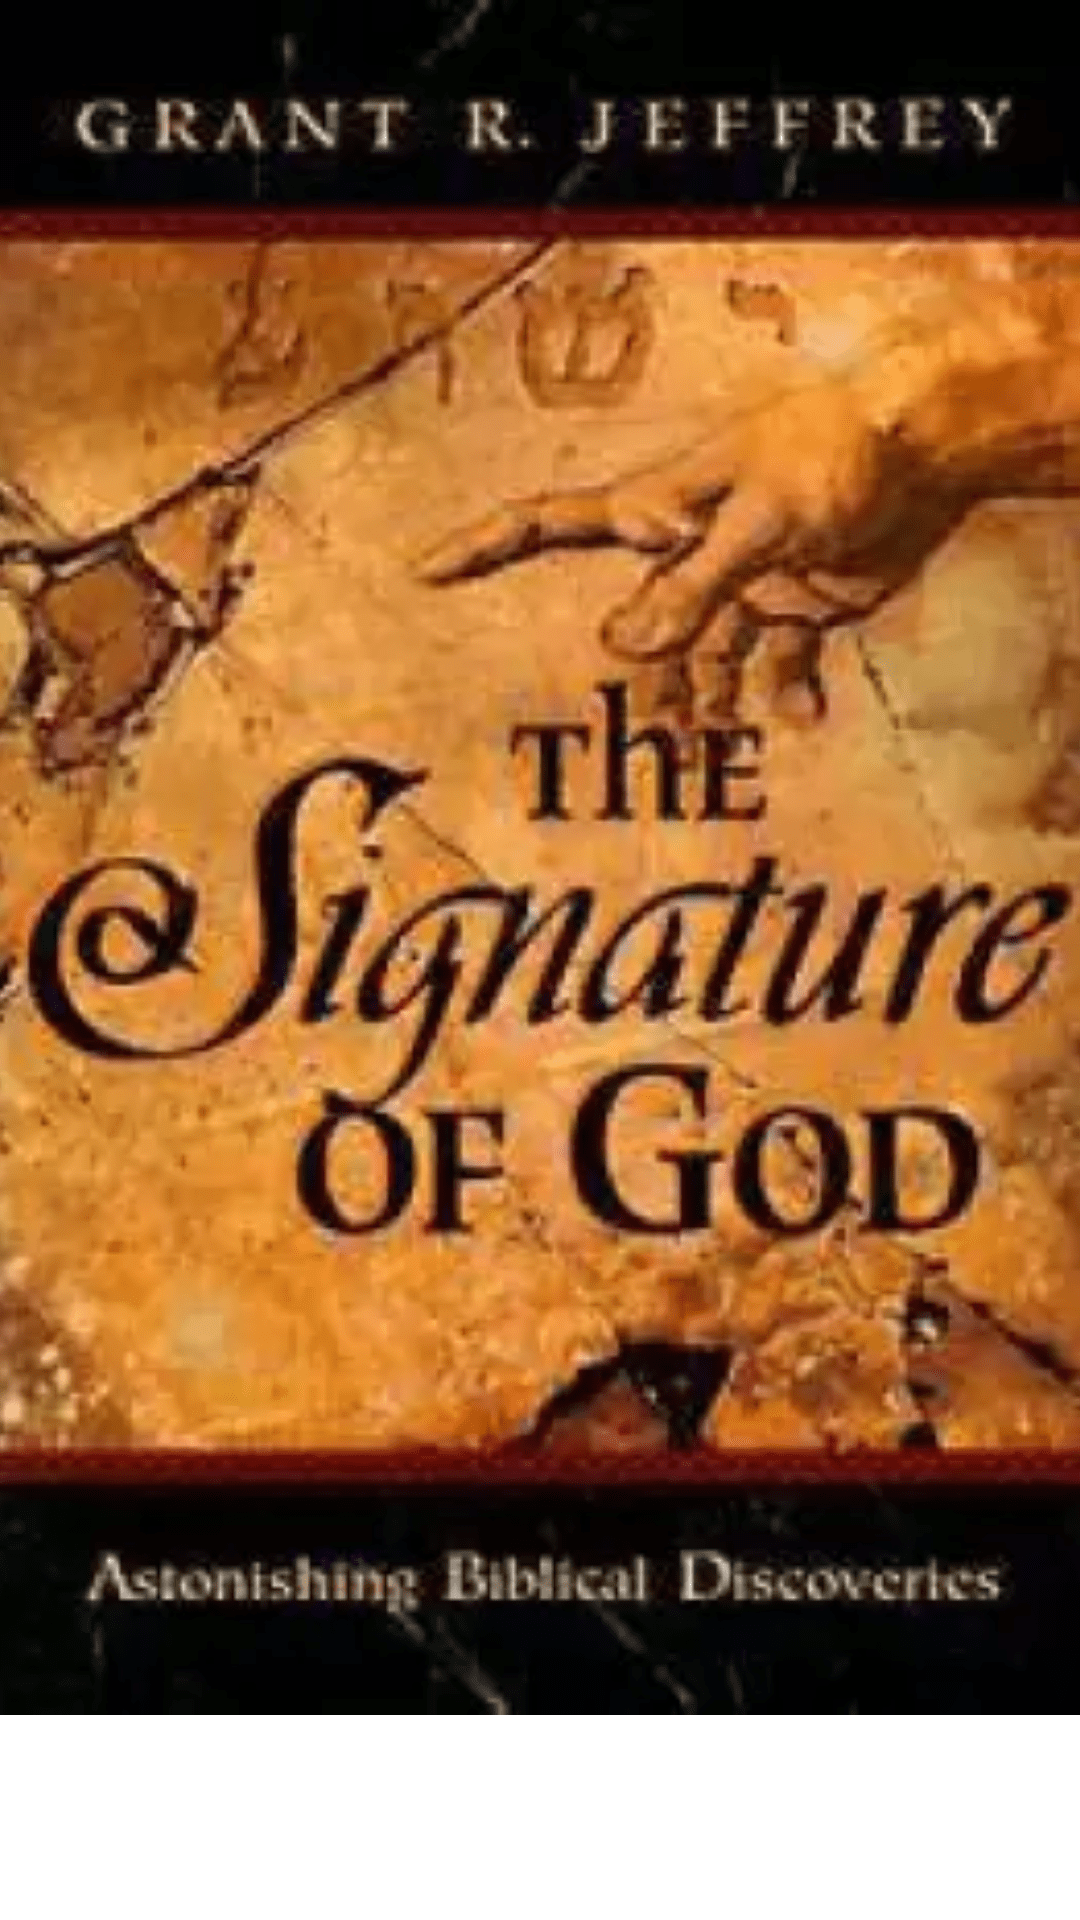 The Signature of God by Grant R. Jeffrey